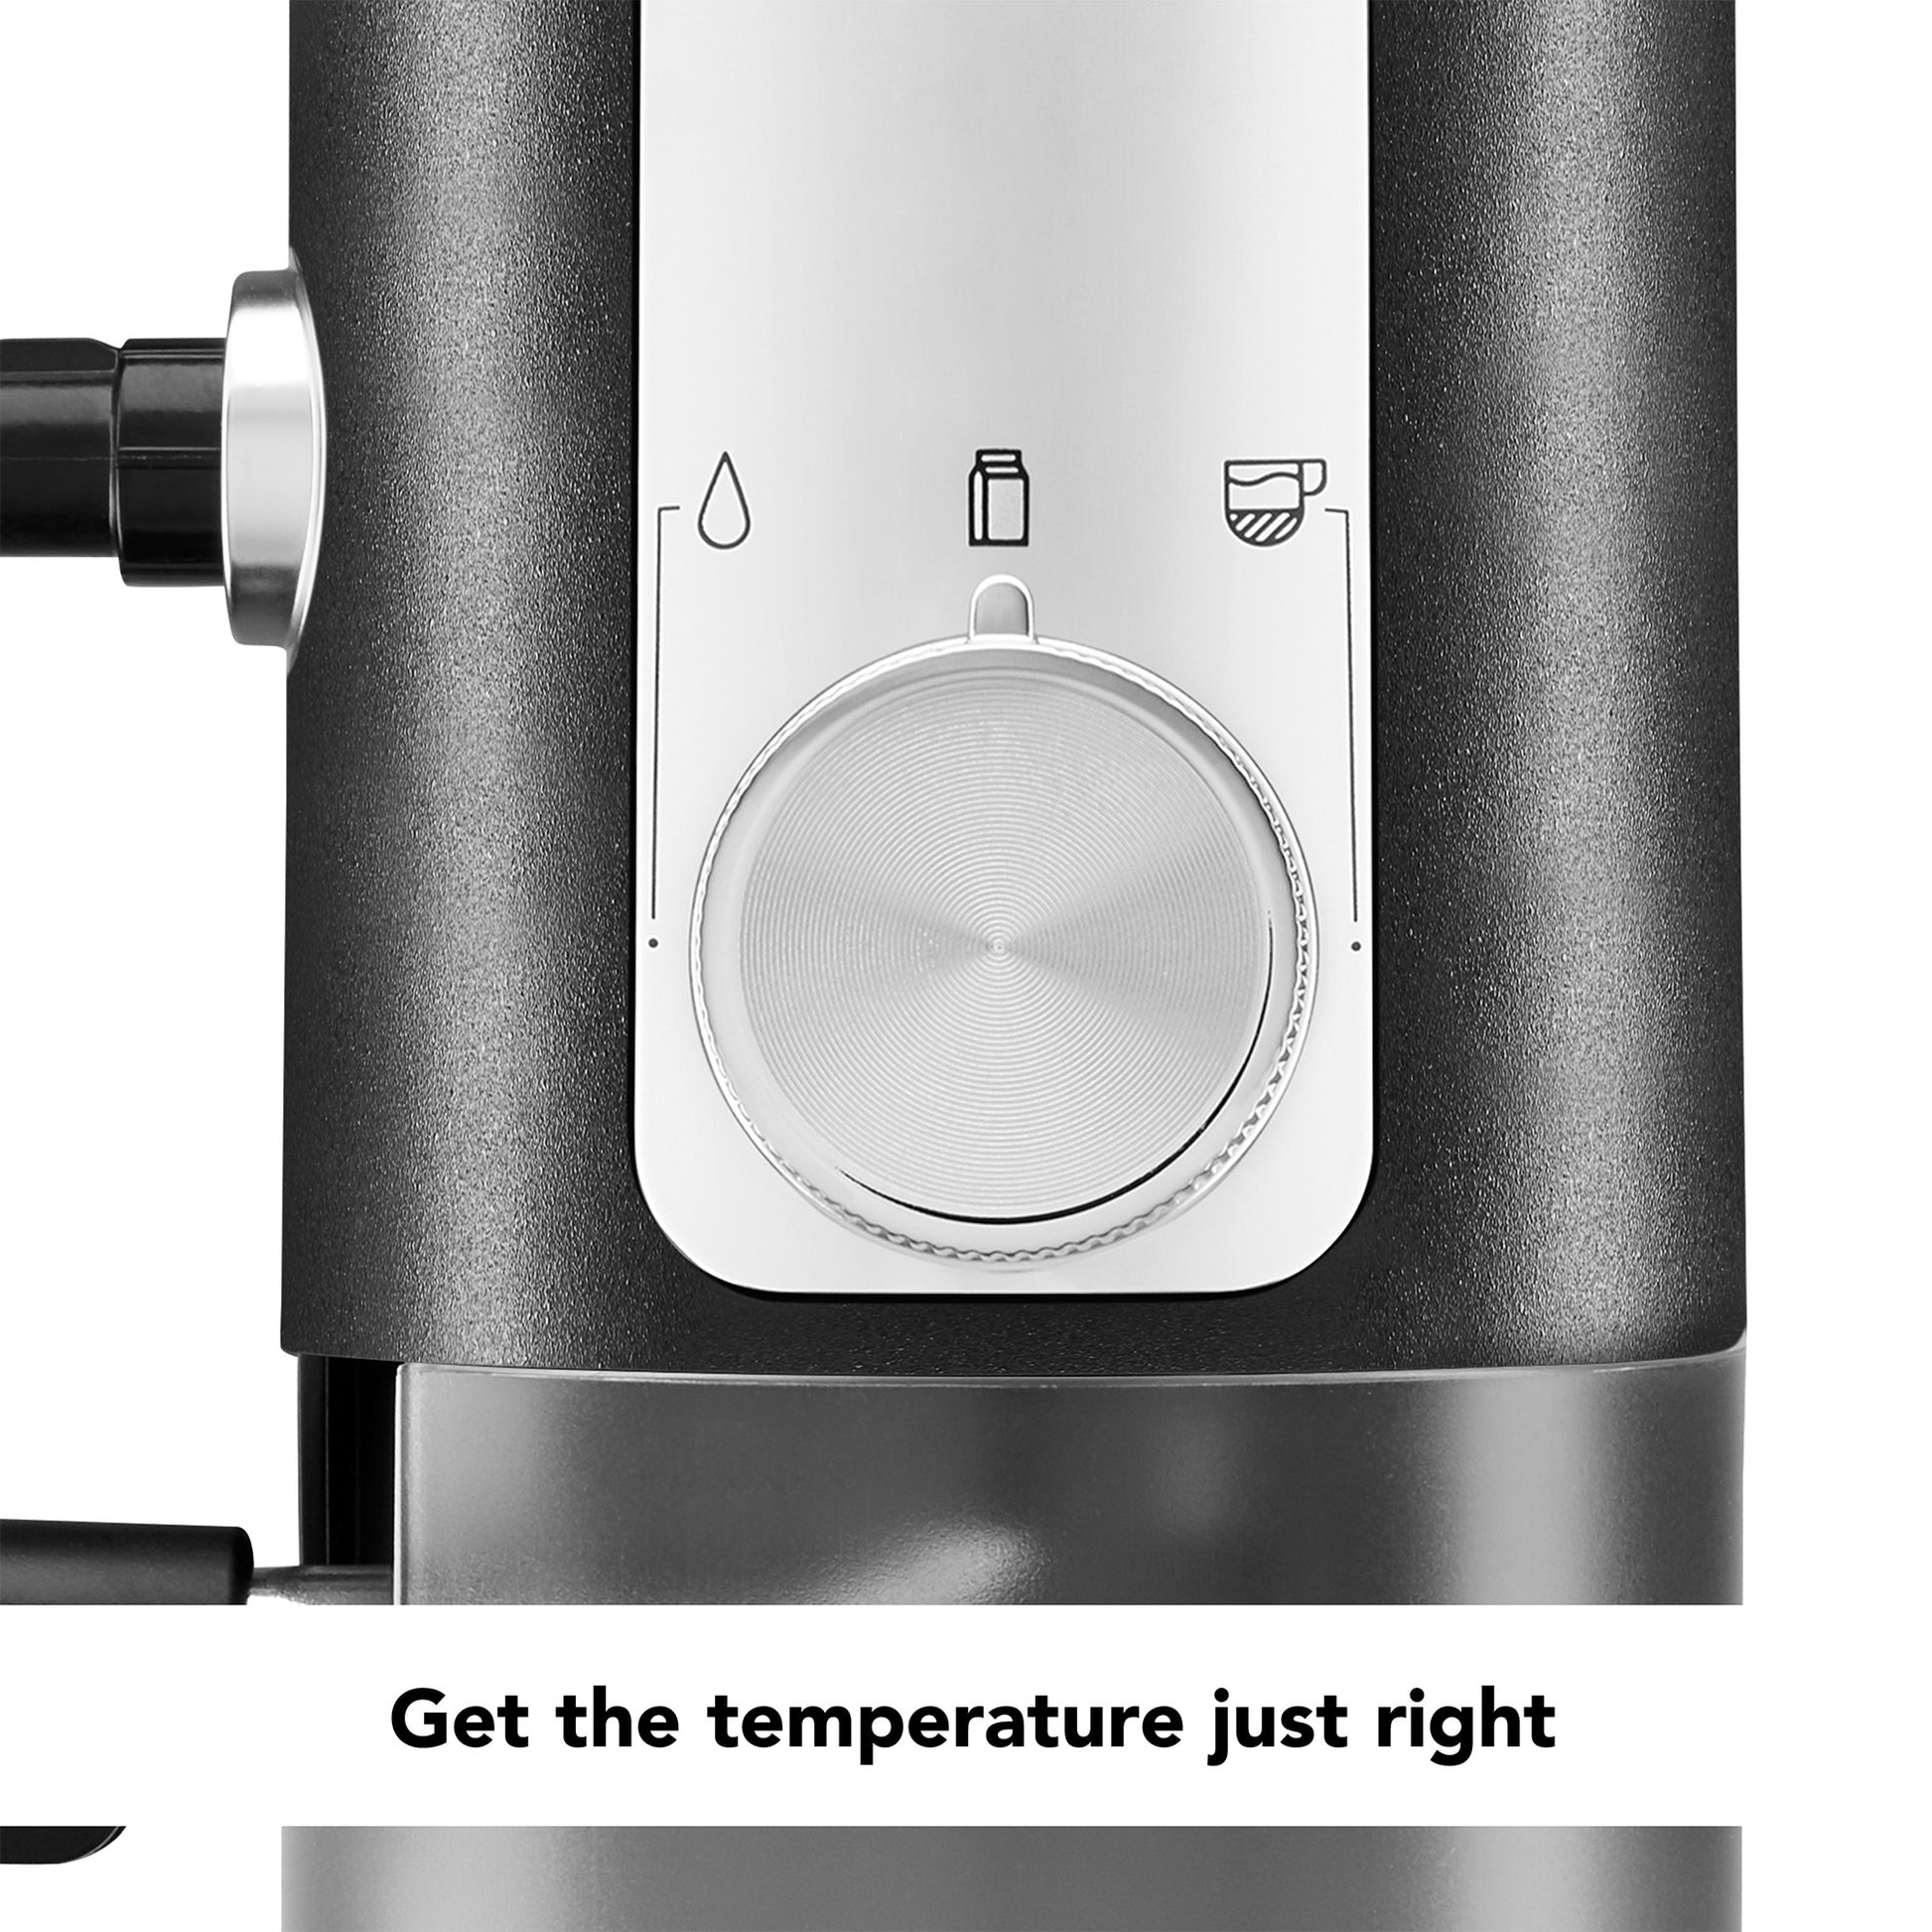 Illy Stainless Steel Electric Milk Frother